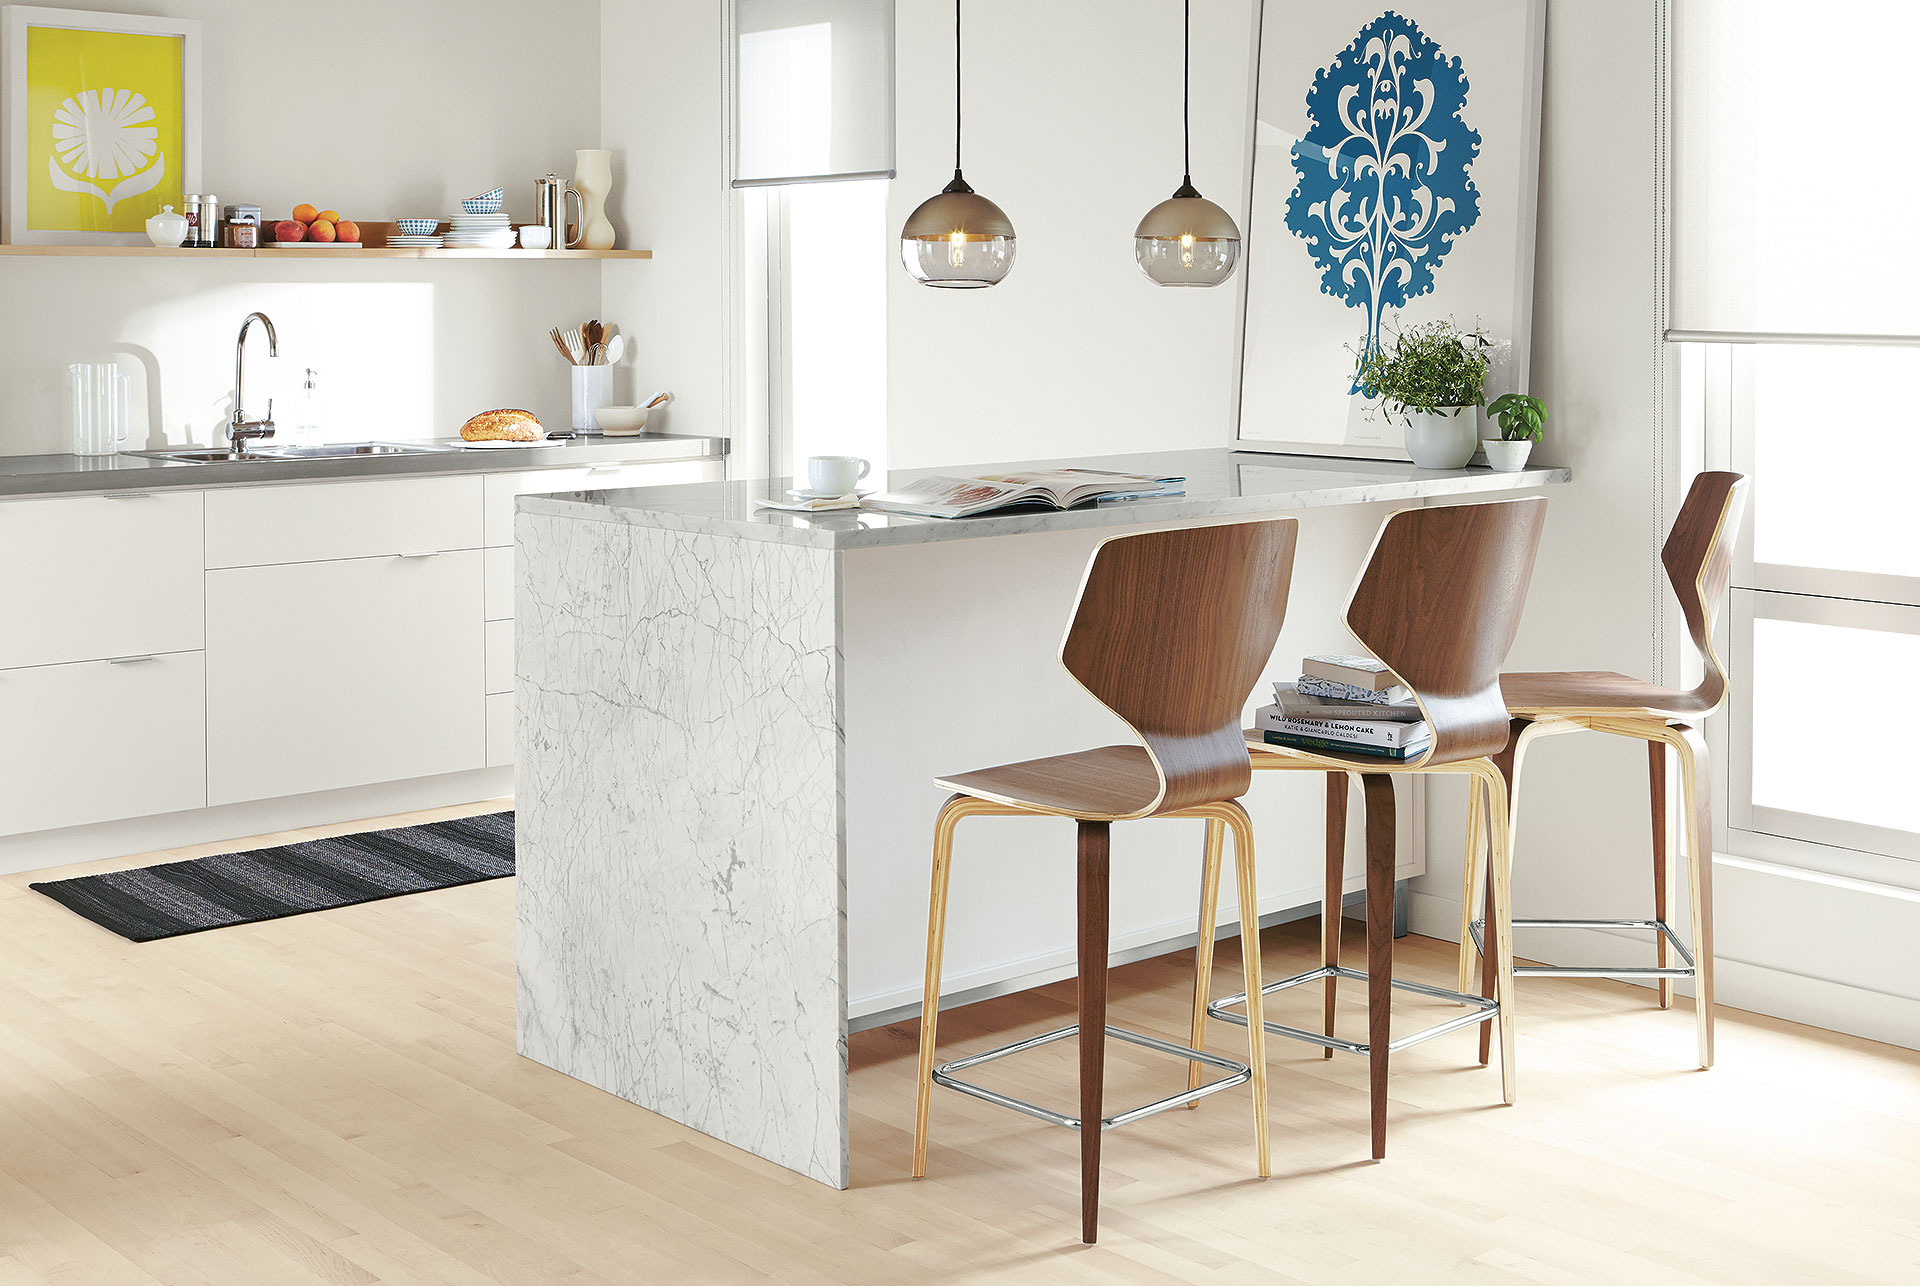 How To Choose Counter Bar Stools, How To Choose Bar Stools For Kitchen